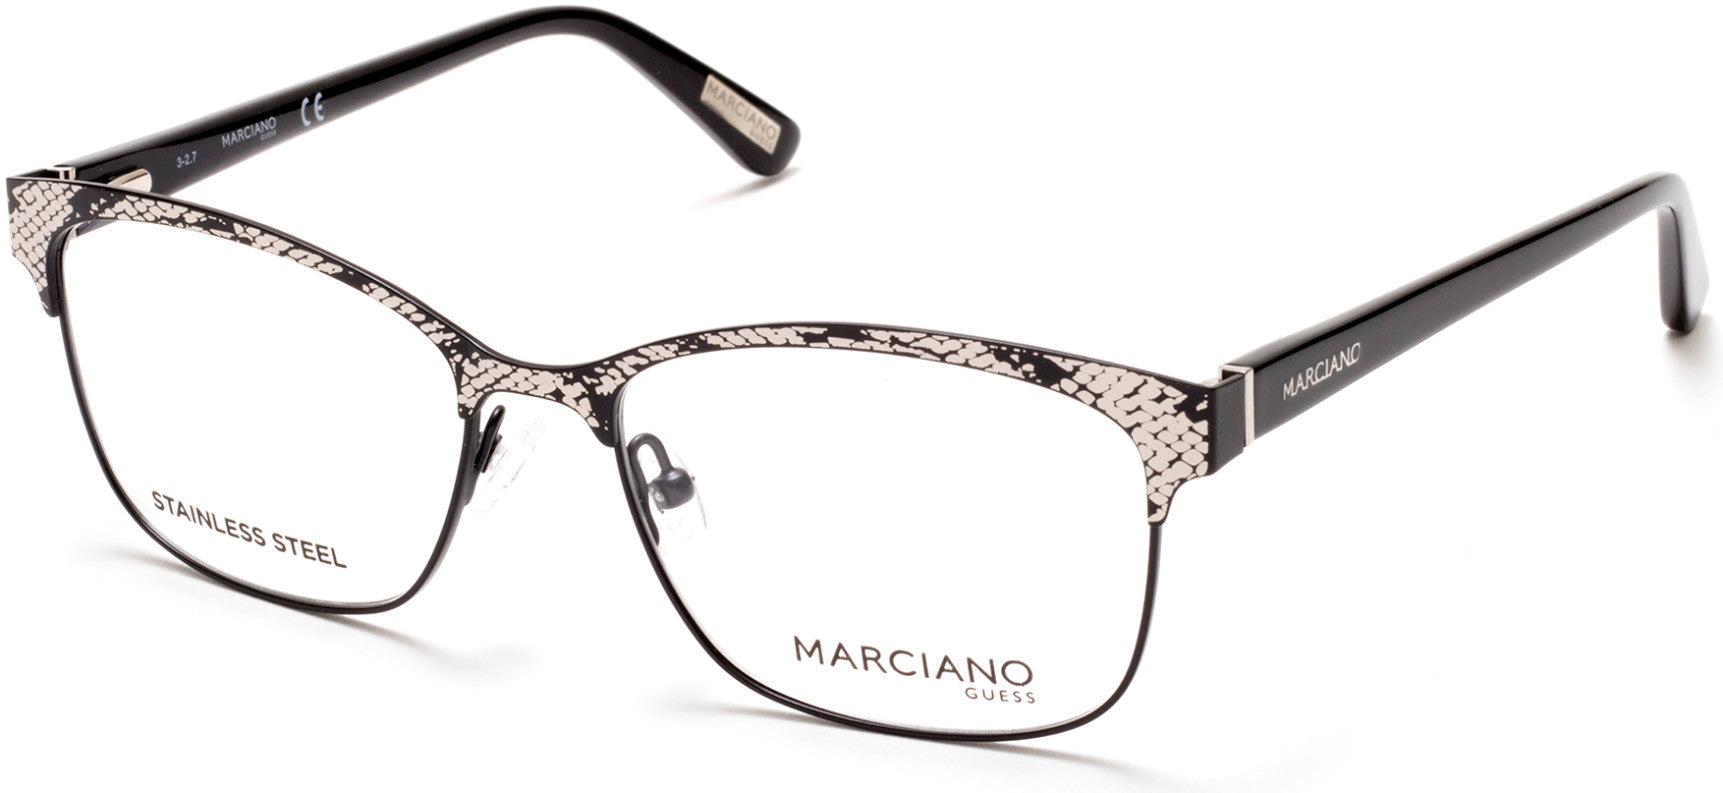 Guess By Marciano GM0318 Square Eyeglasses 002-002 - Matte Black